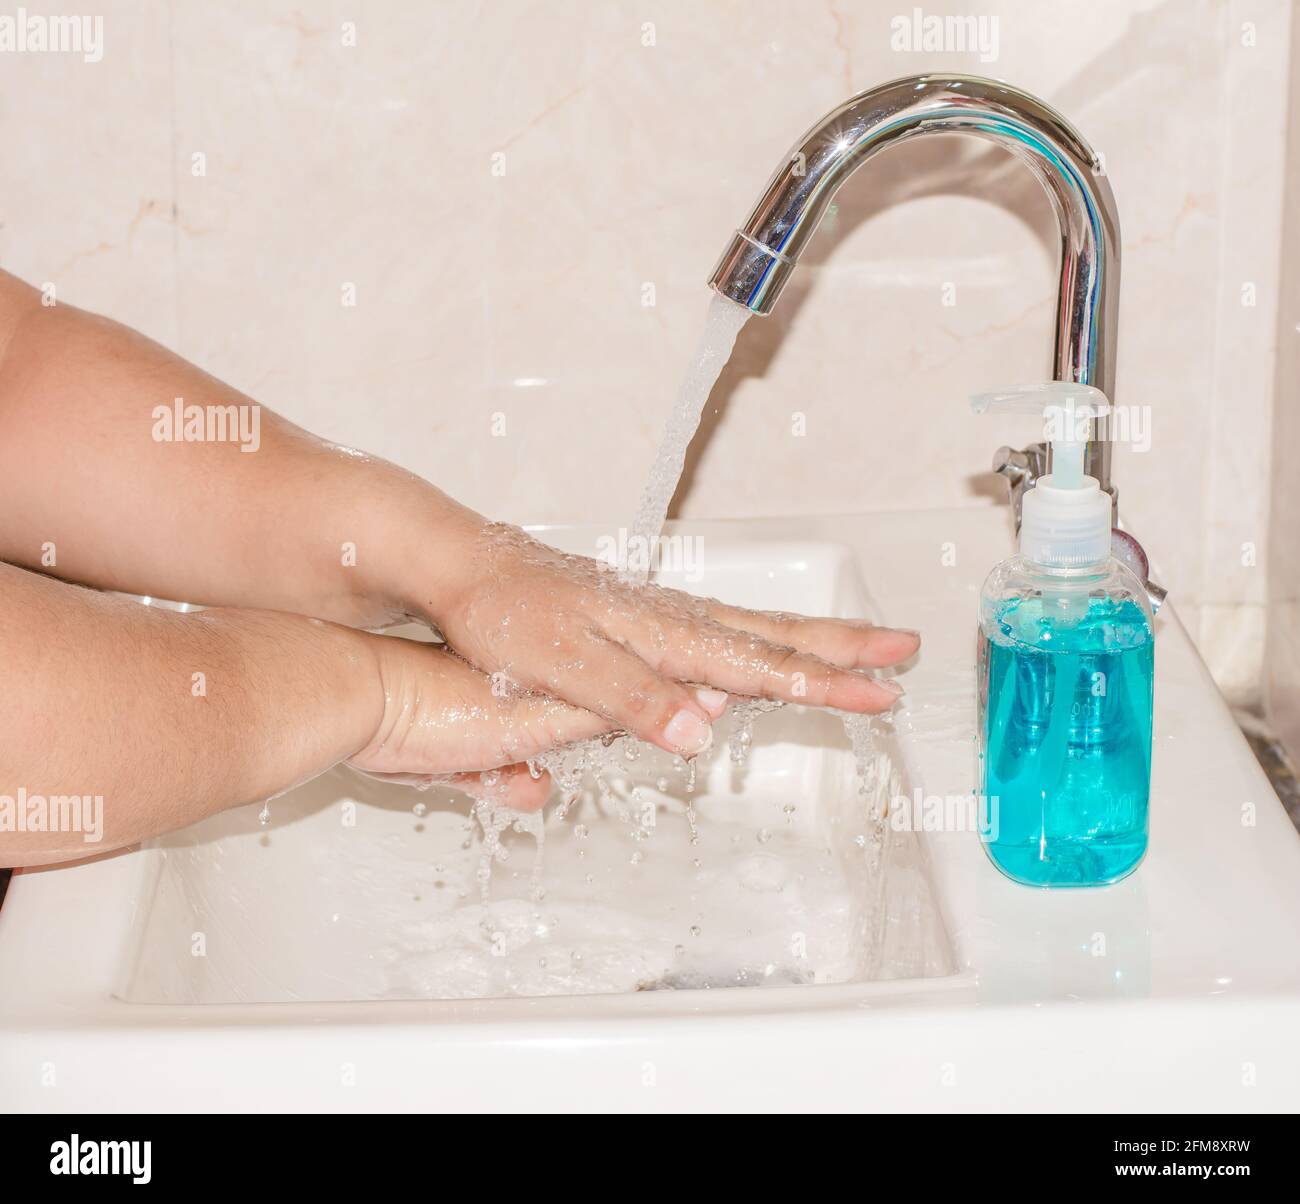 Hand Hygiene - Steps of Cleaning Hands with Hand washing Soap, Corona virus prevention hand wash steps with soap Stock Photo